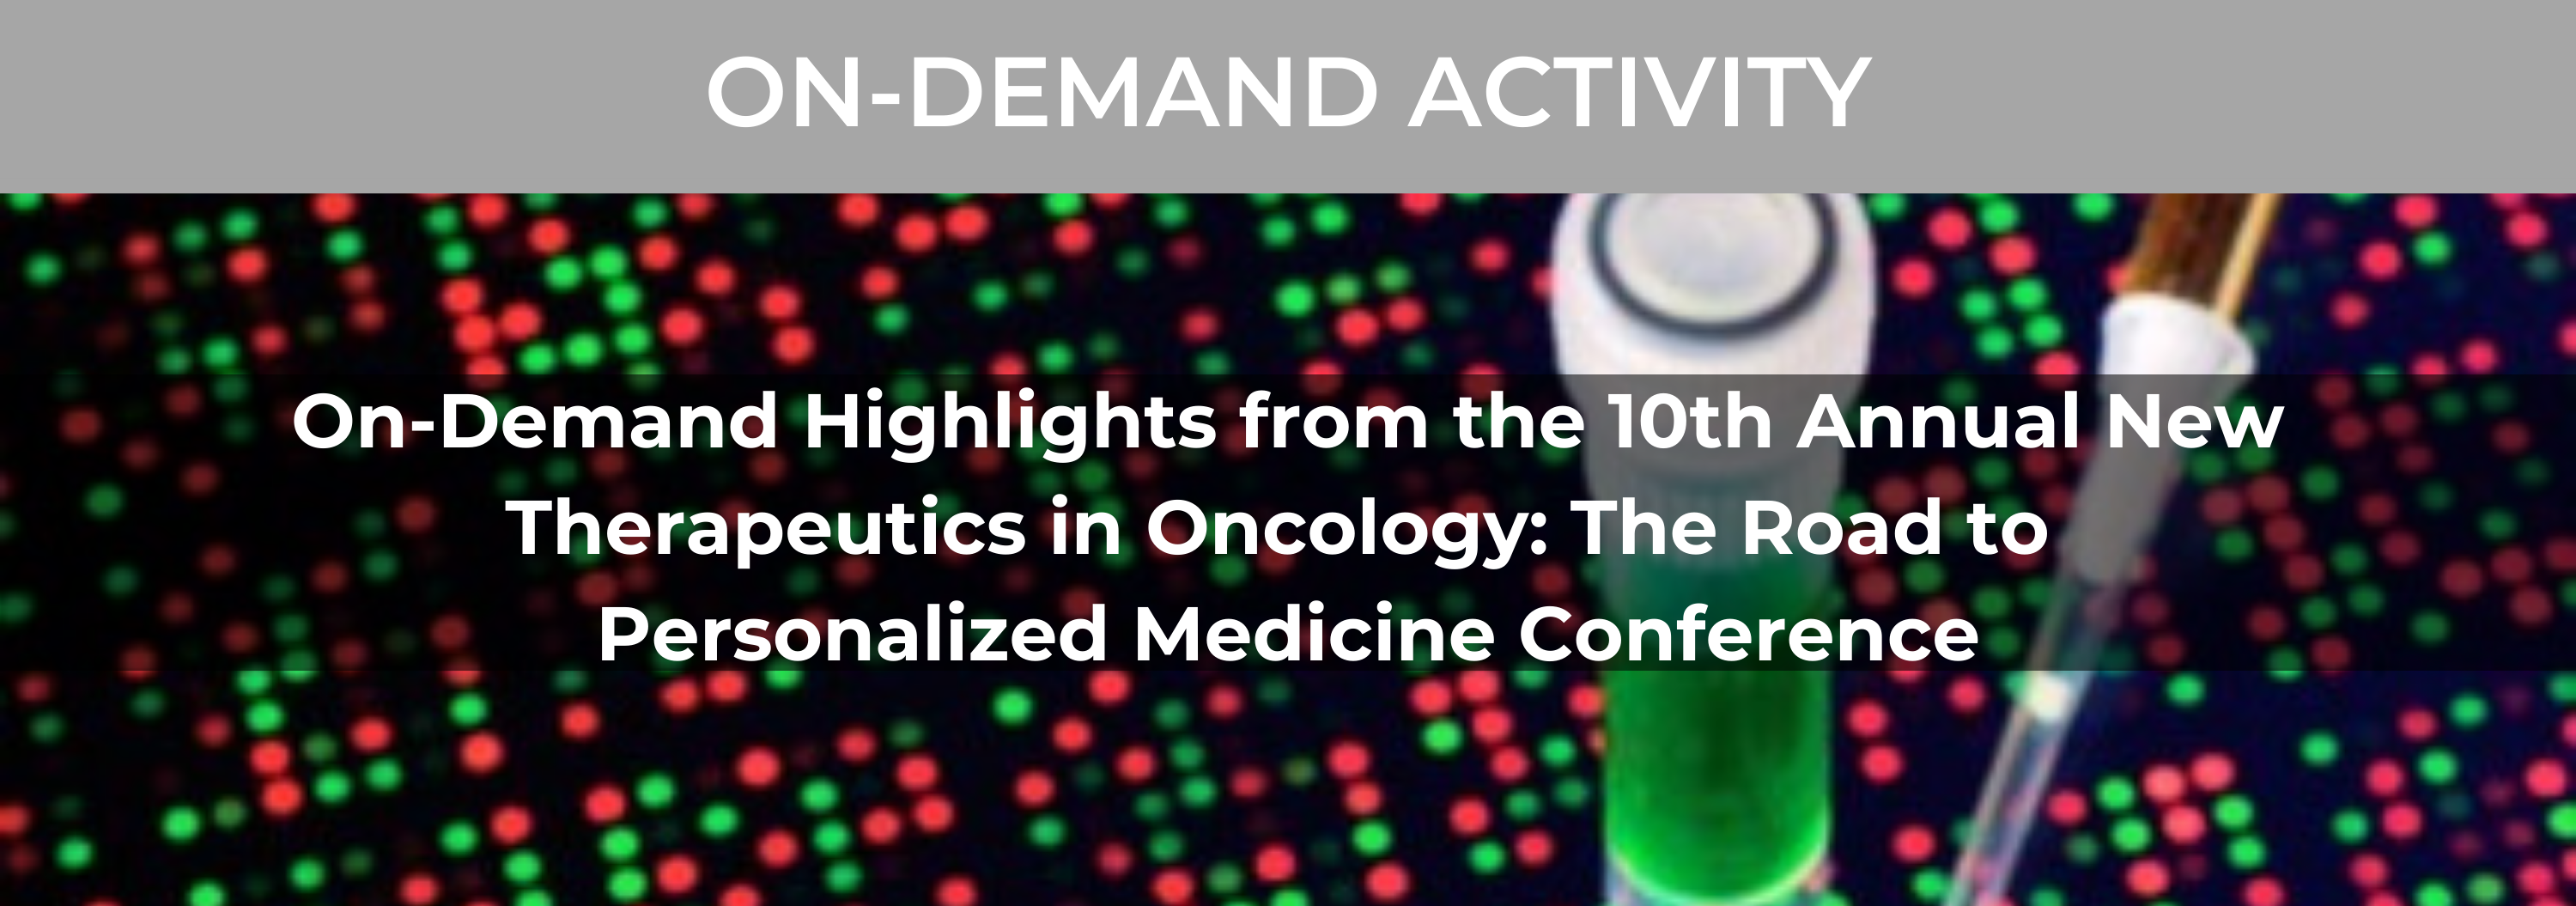 On-Demand Highlights from the 10th Annual New Therapeutics in Oncology: The Road to Personalized Medicine Conference Banner